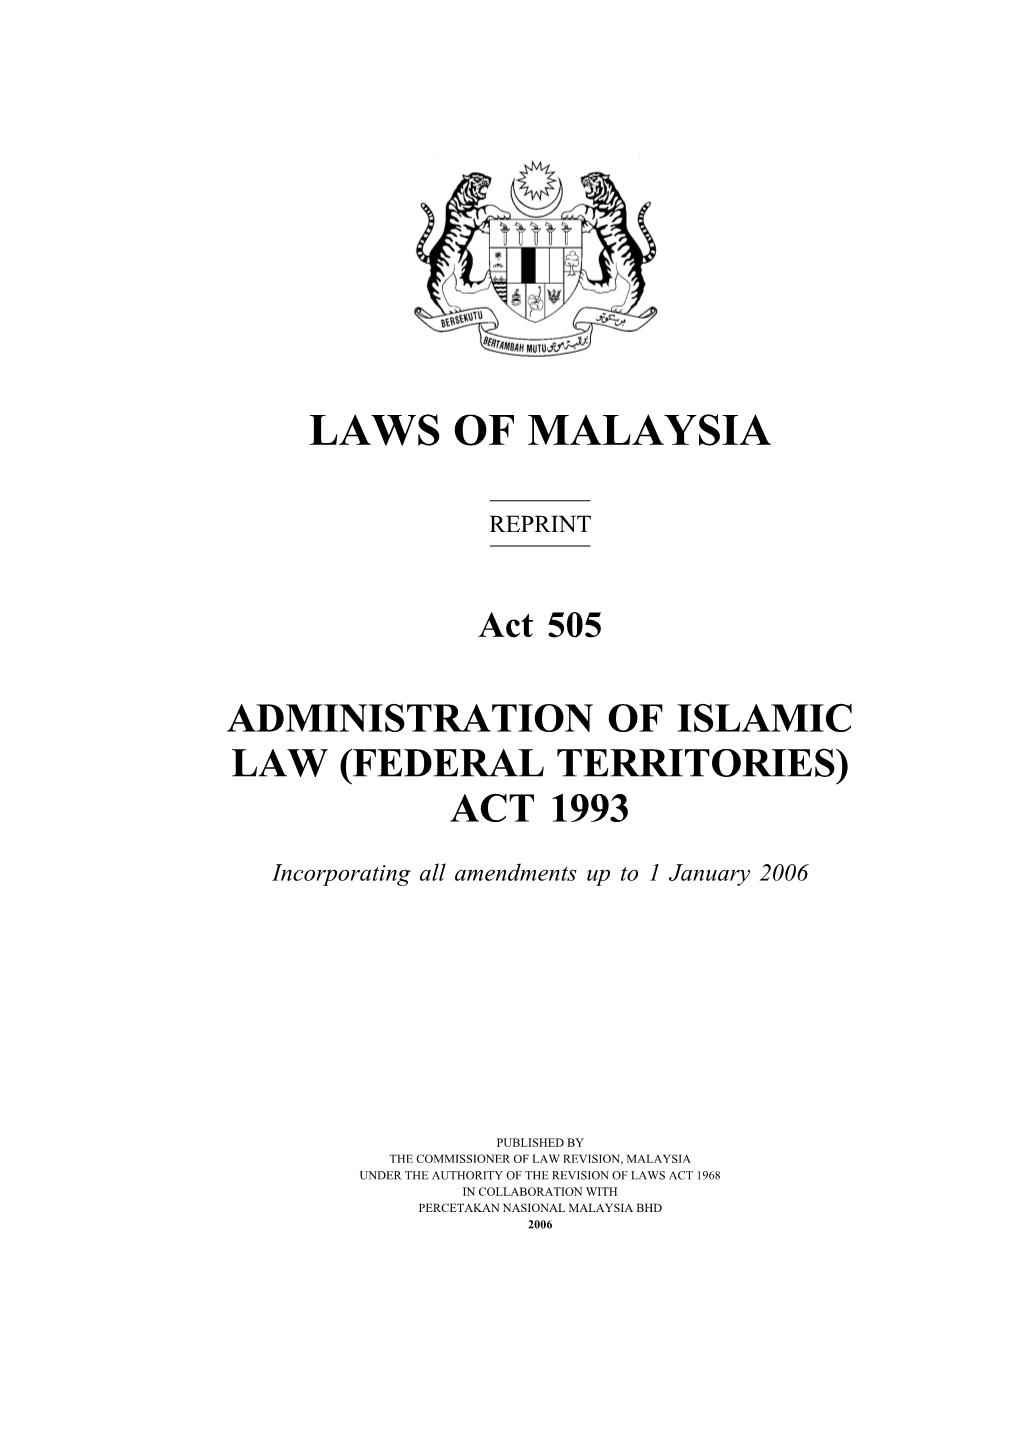 ACT 505 Administration of Islamic Law 9 (Federal Territories) LAWS of MALAYSIA